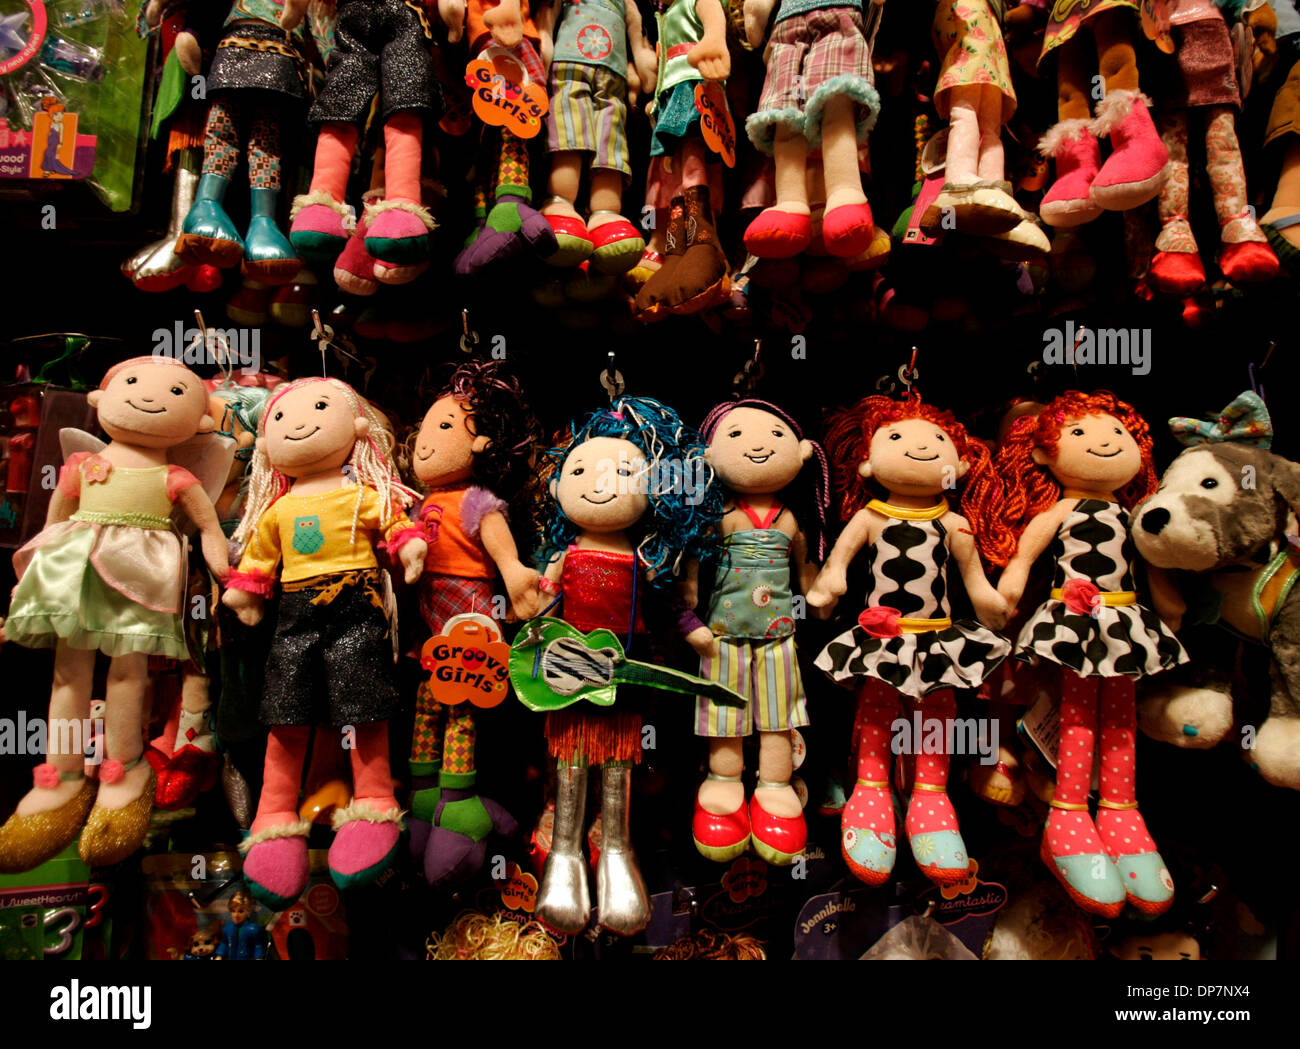 Nov 20, 2006; San Diego, CA, USA; Groovy Girls dolls at Geppetto's in  Fashion Valley. Mandatory Credit: Photo by Laura Embry/SDU-T/ZUMA Press.  (©) Copyright 2006 by SDU-T Stock Photo - Alamy